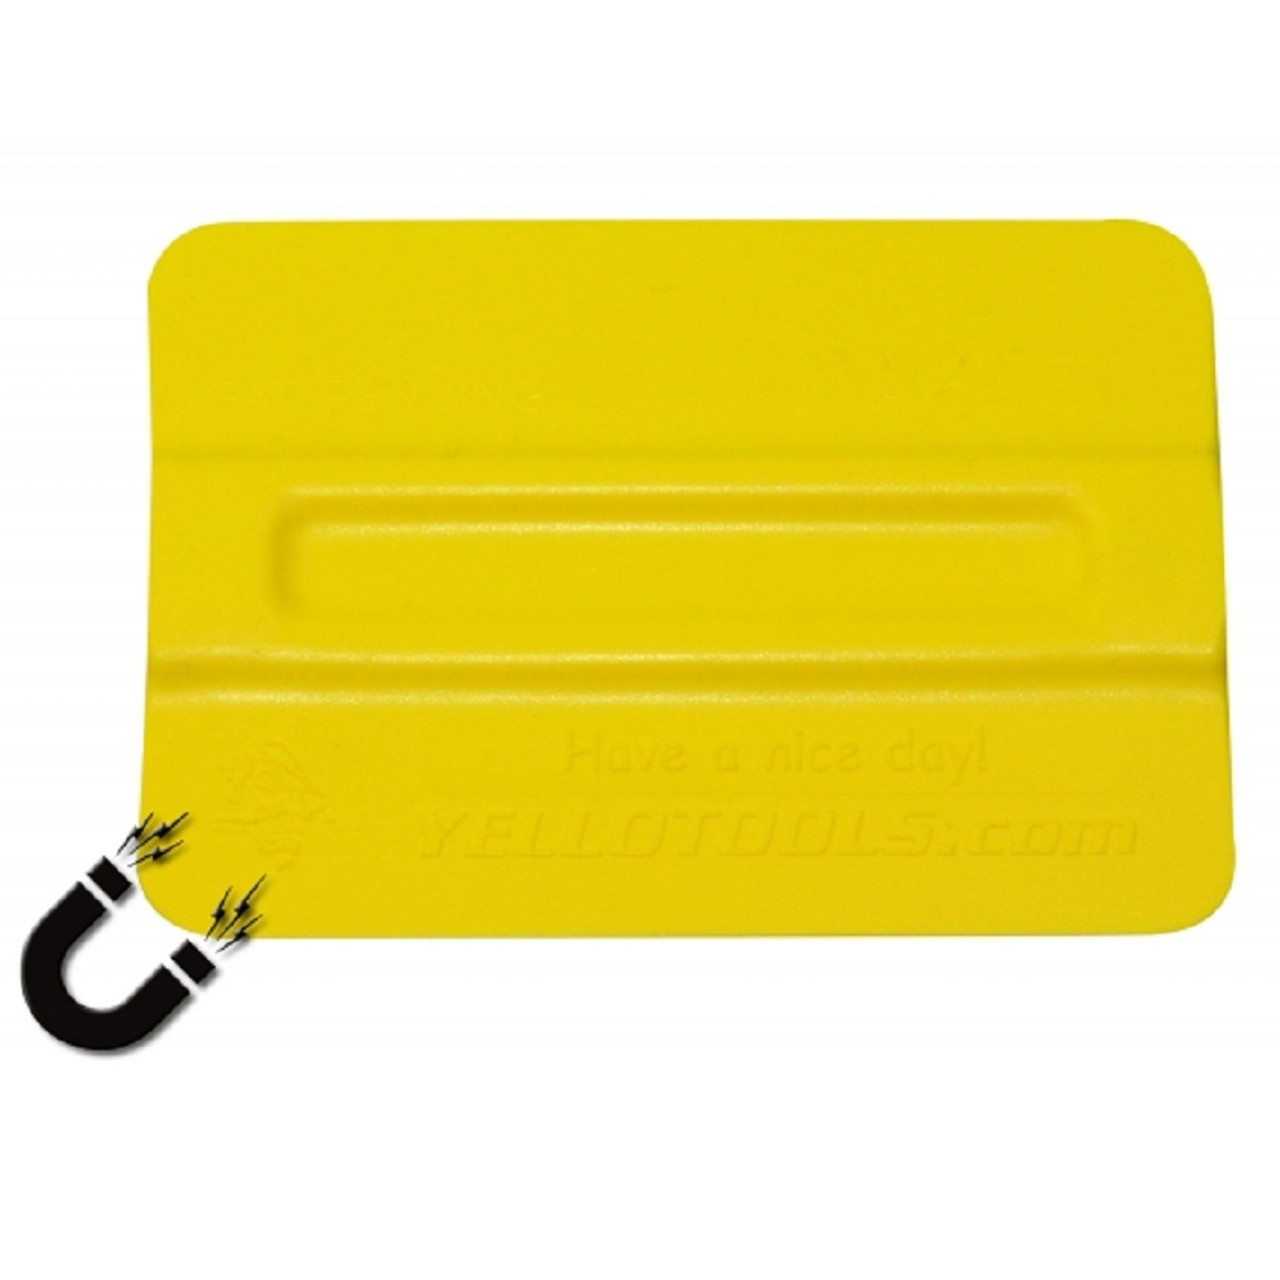 Yellotools TonnyMag Squeegee w/ Interior Magnet (Selectable Firmness )